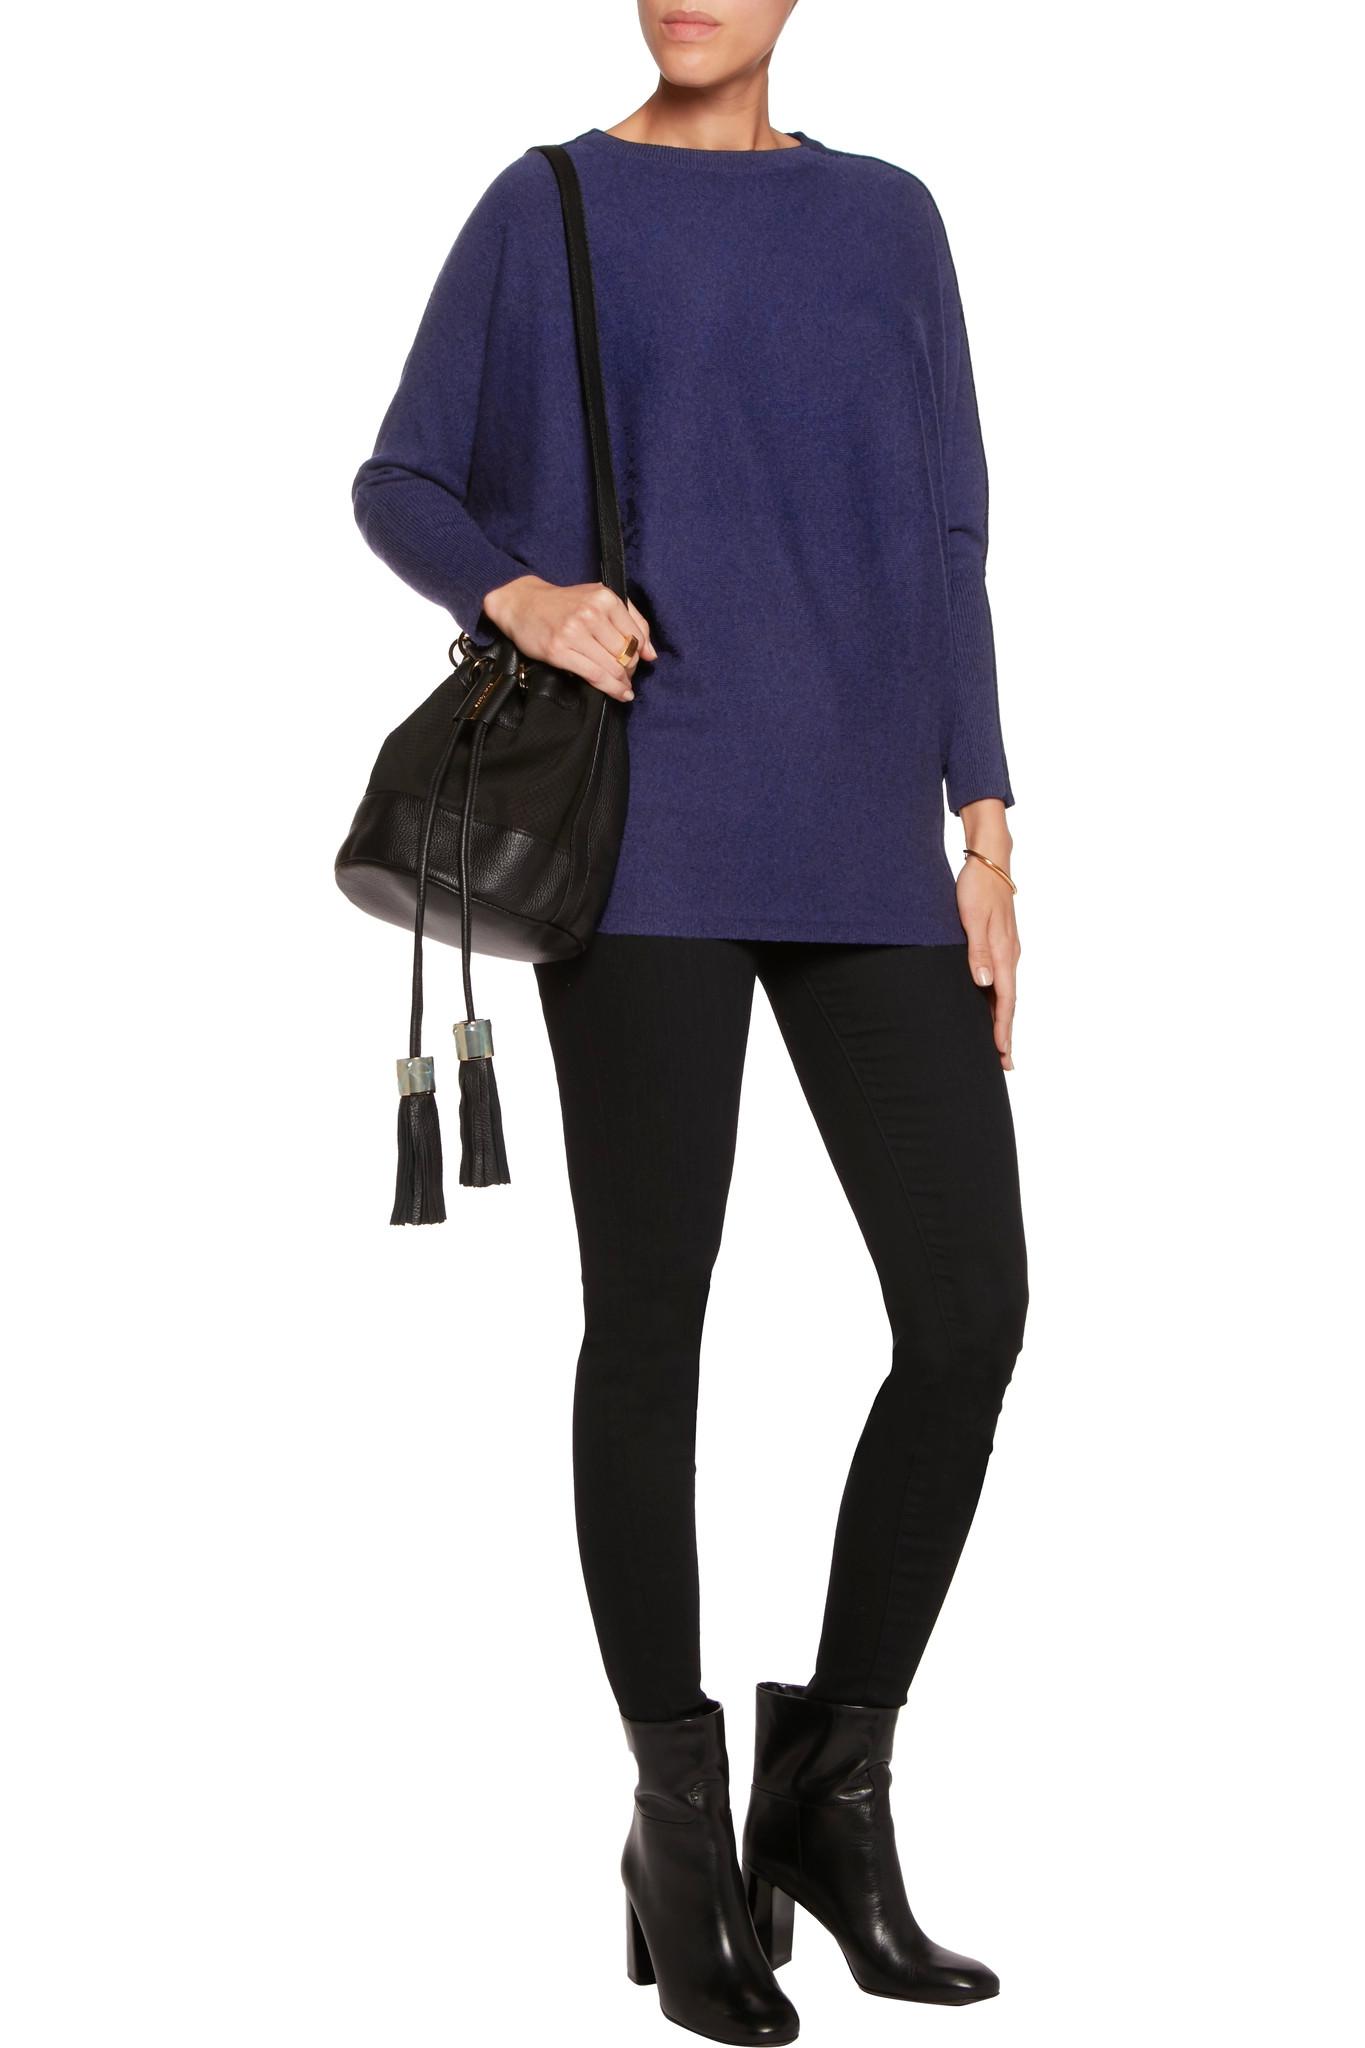 Lyst - N.Peal Cashmere Cashmere Sweater in Blue